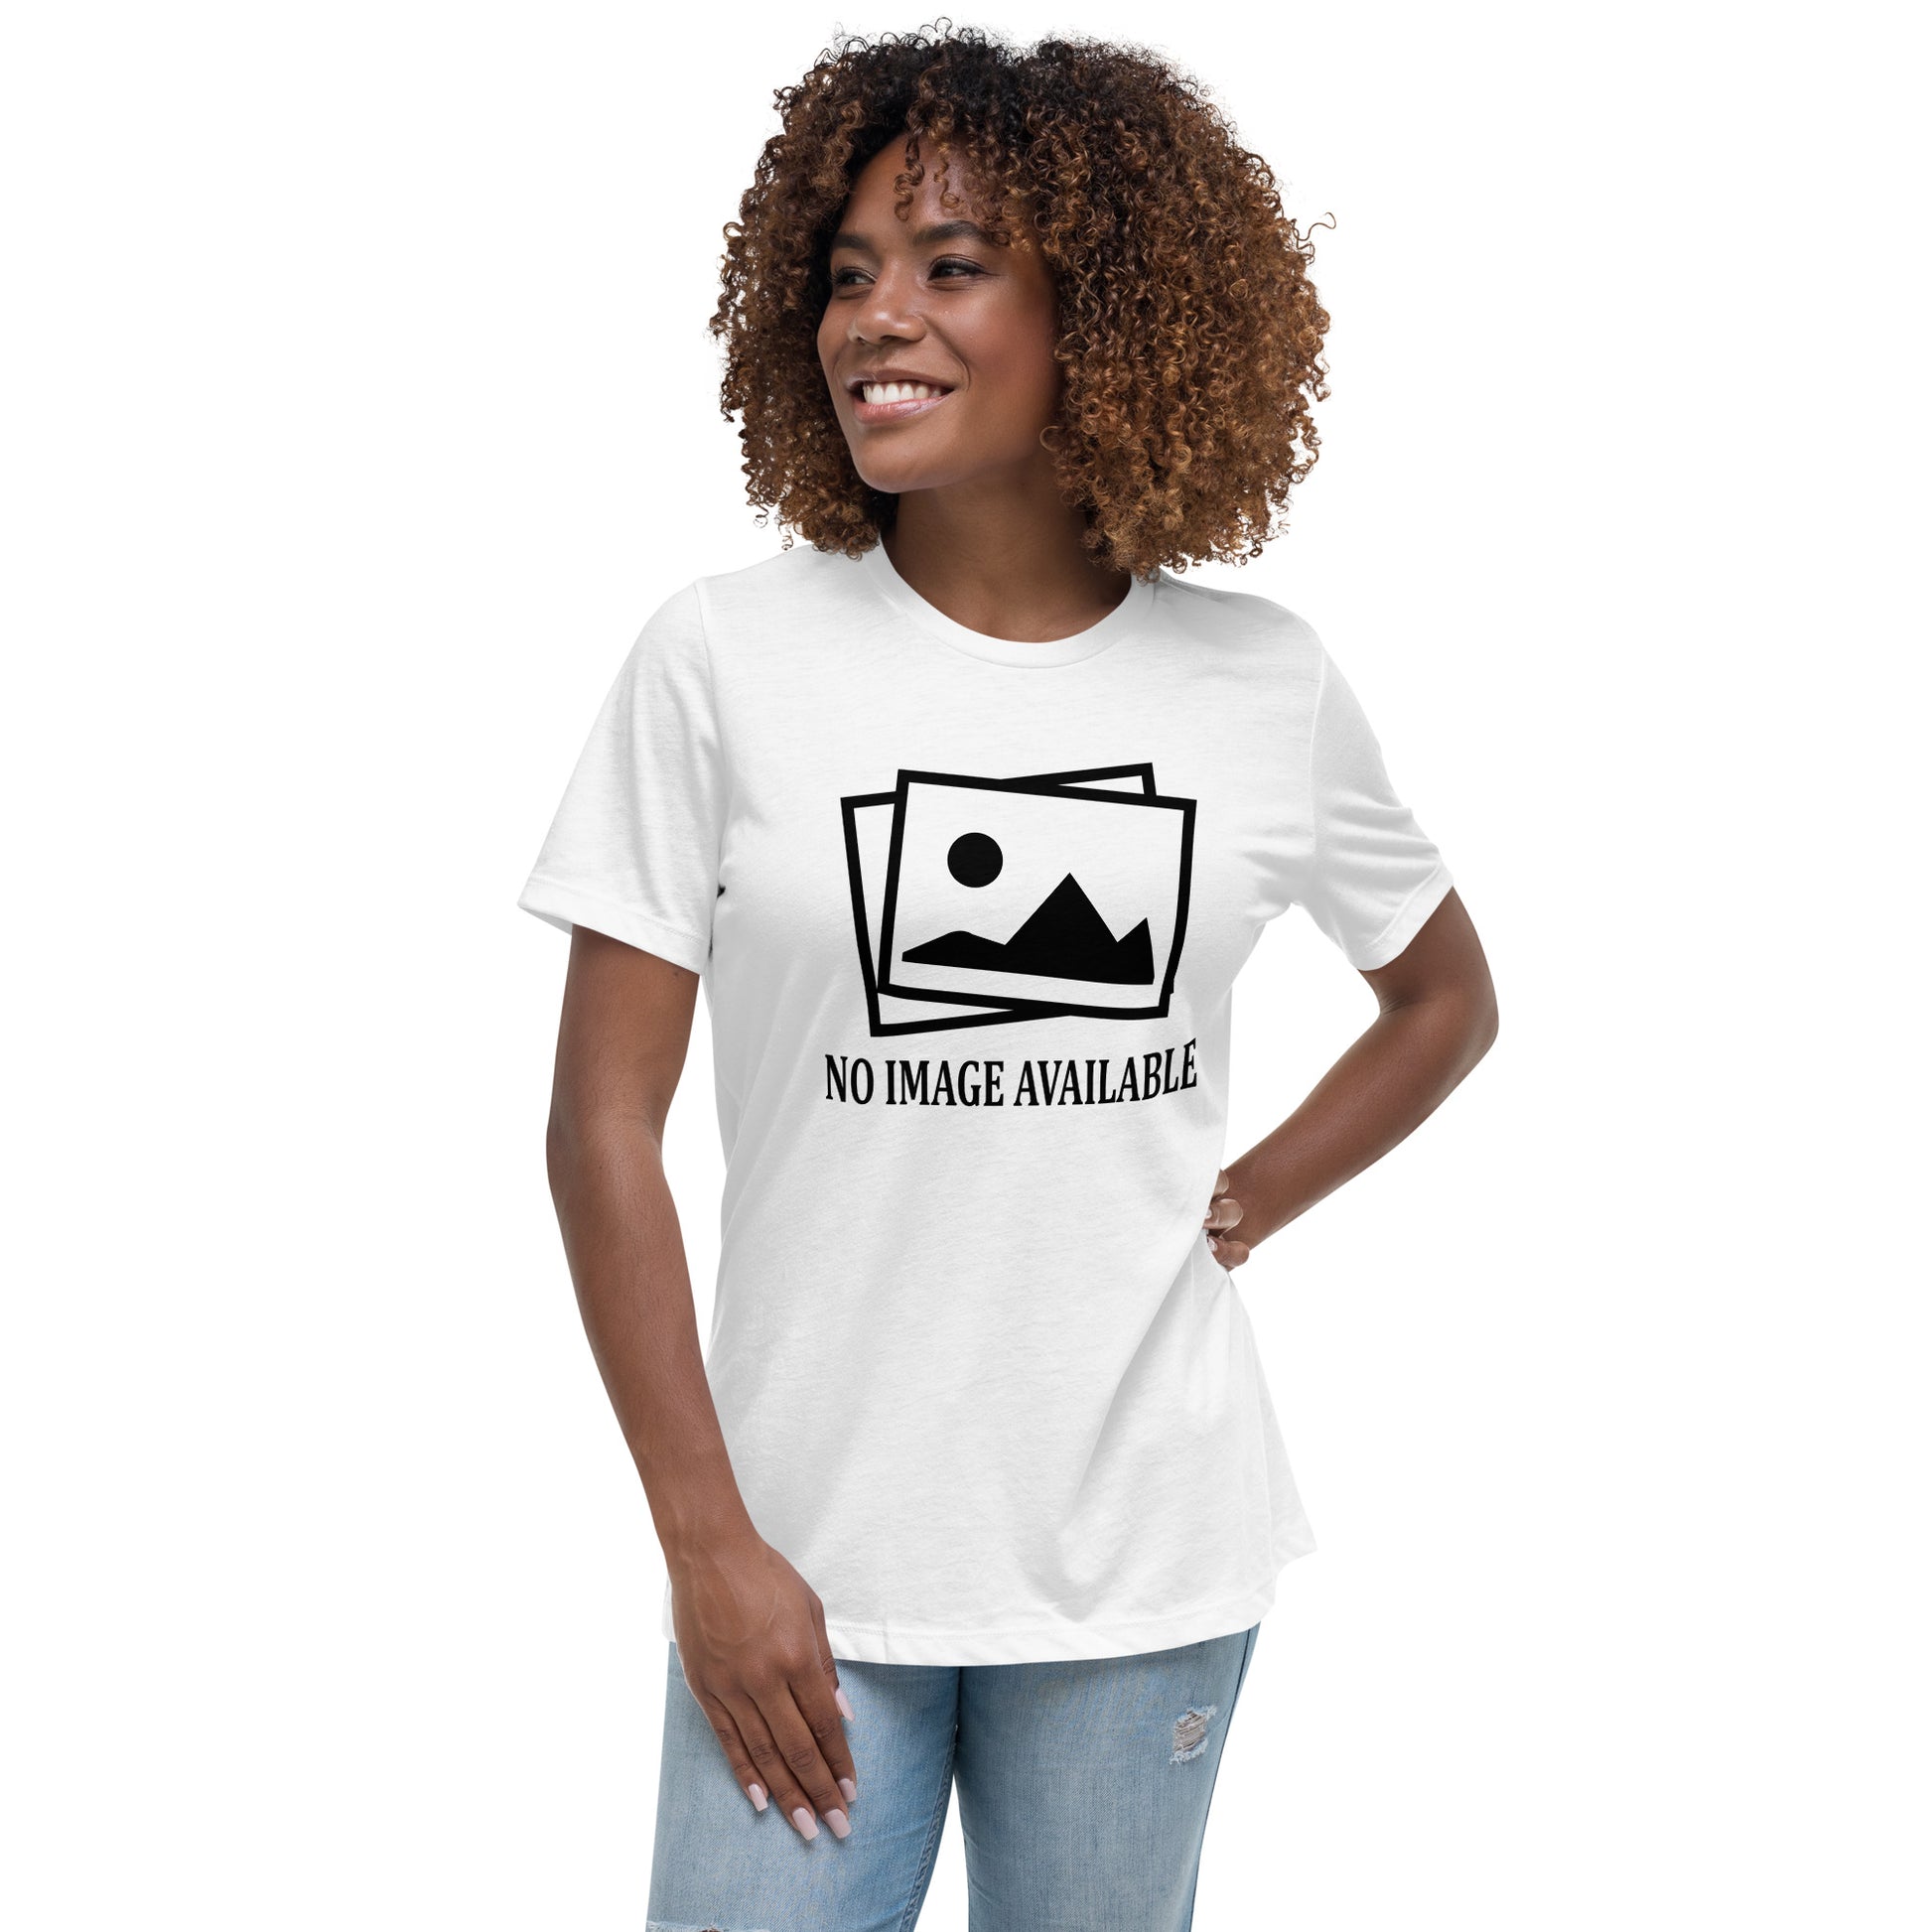 Women with white t-shirt with image and text "no image available"